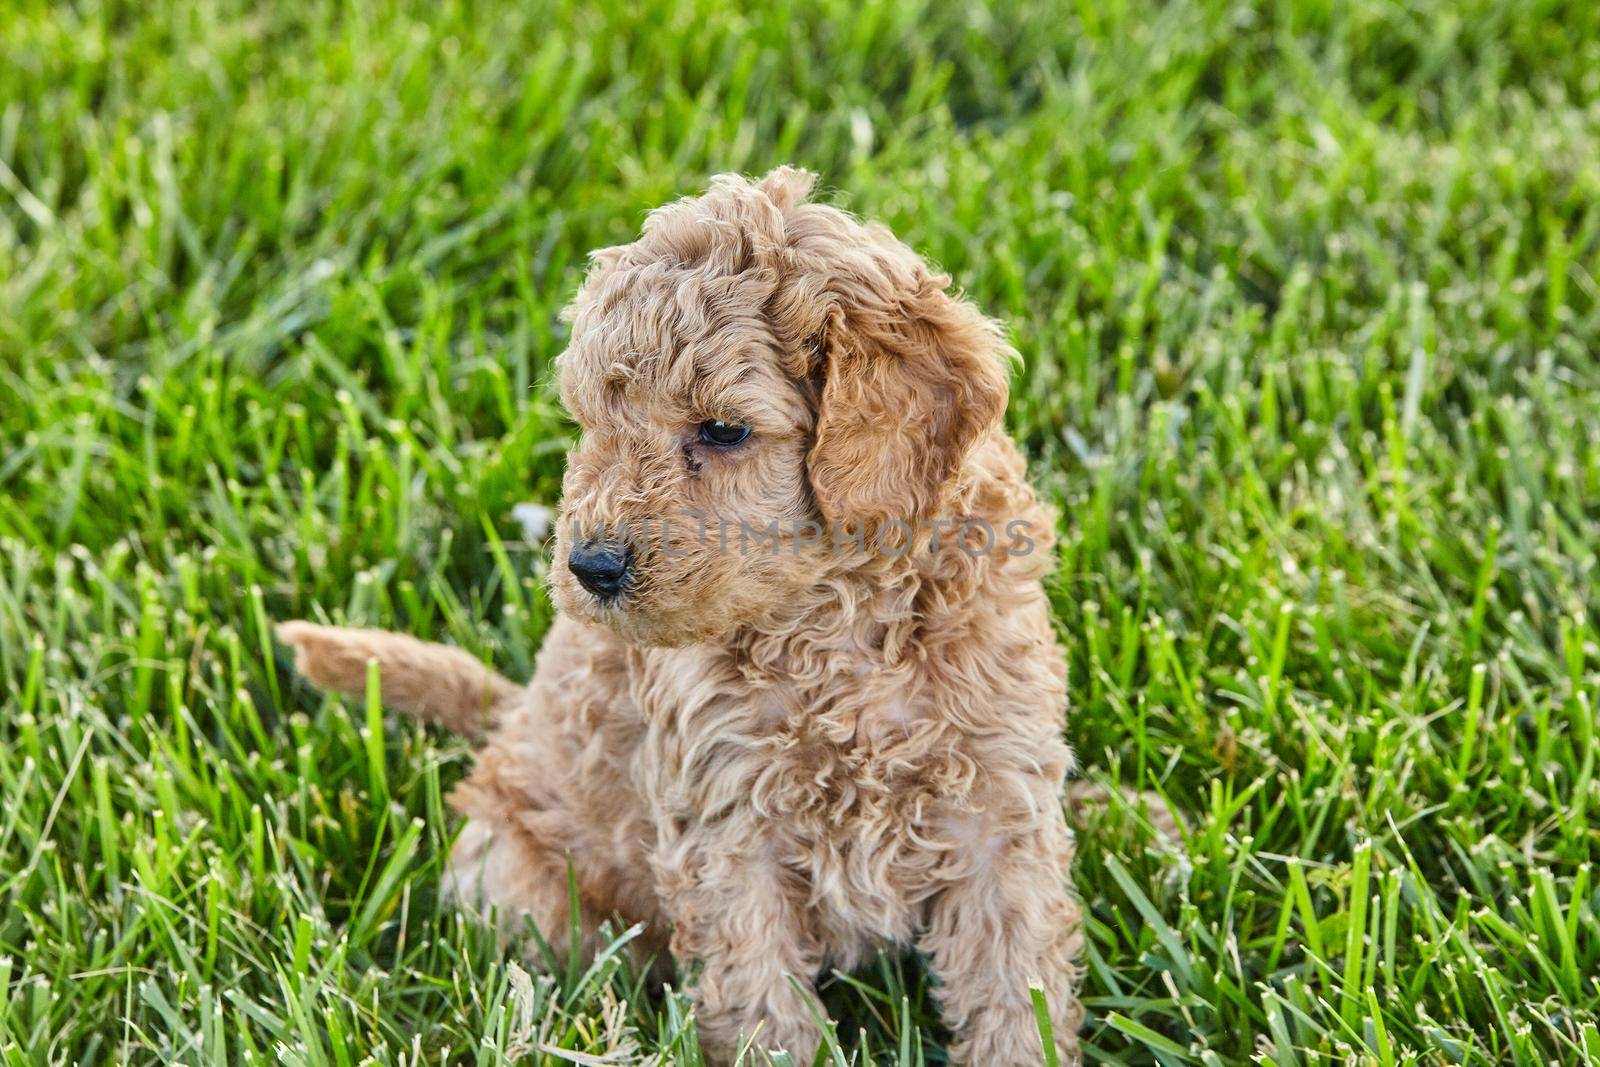 Cute Goldendoodle puppy sitting in grass by njproductions